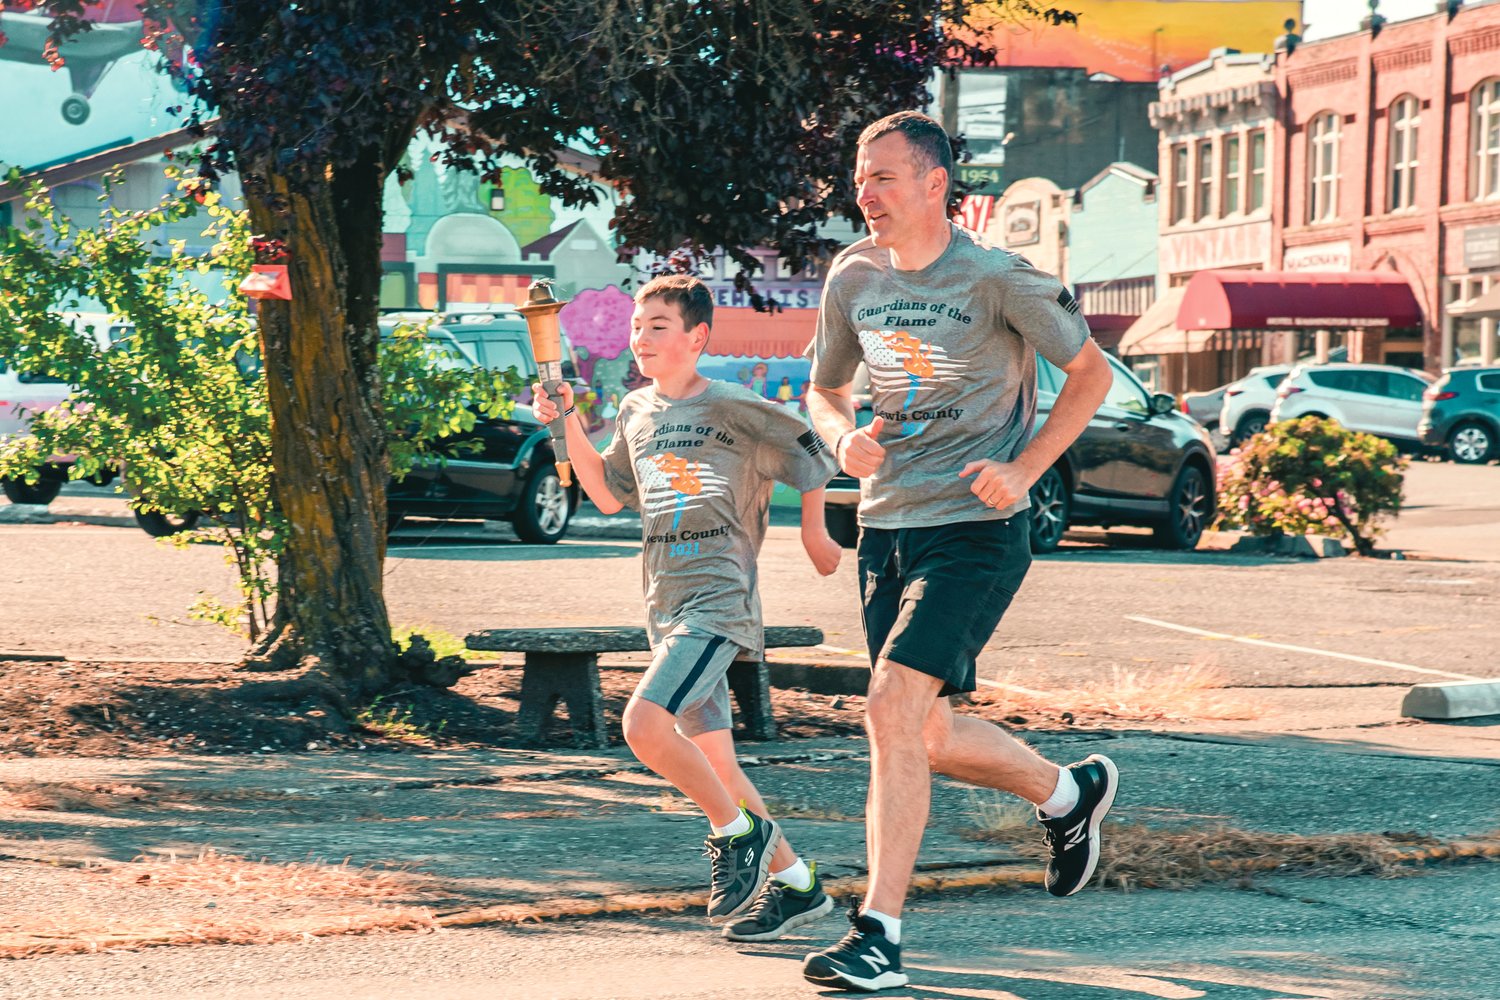 A torch is carried through downtown Chehalis during the Lewis County Law Enforcement Torch Run for the Special Olympics Saturday morning. Each runner from local law enforcement agencies participated on behalf of an athlete. Supporters donated money to sponsor a favorite first responder or Special Olympics athlete. The funds raised each year are an important part of keeping the opportunities available for local athletes. Learn more at lewiscountyletr.com.